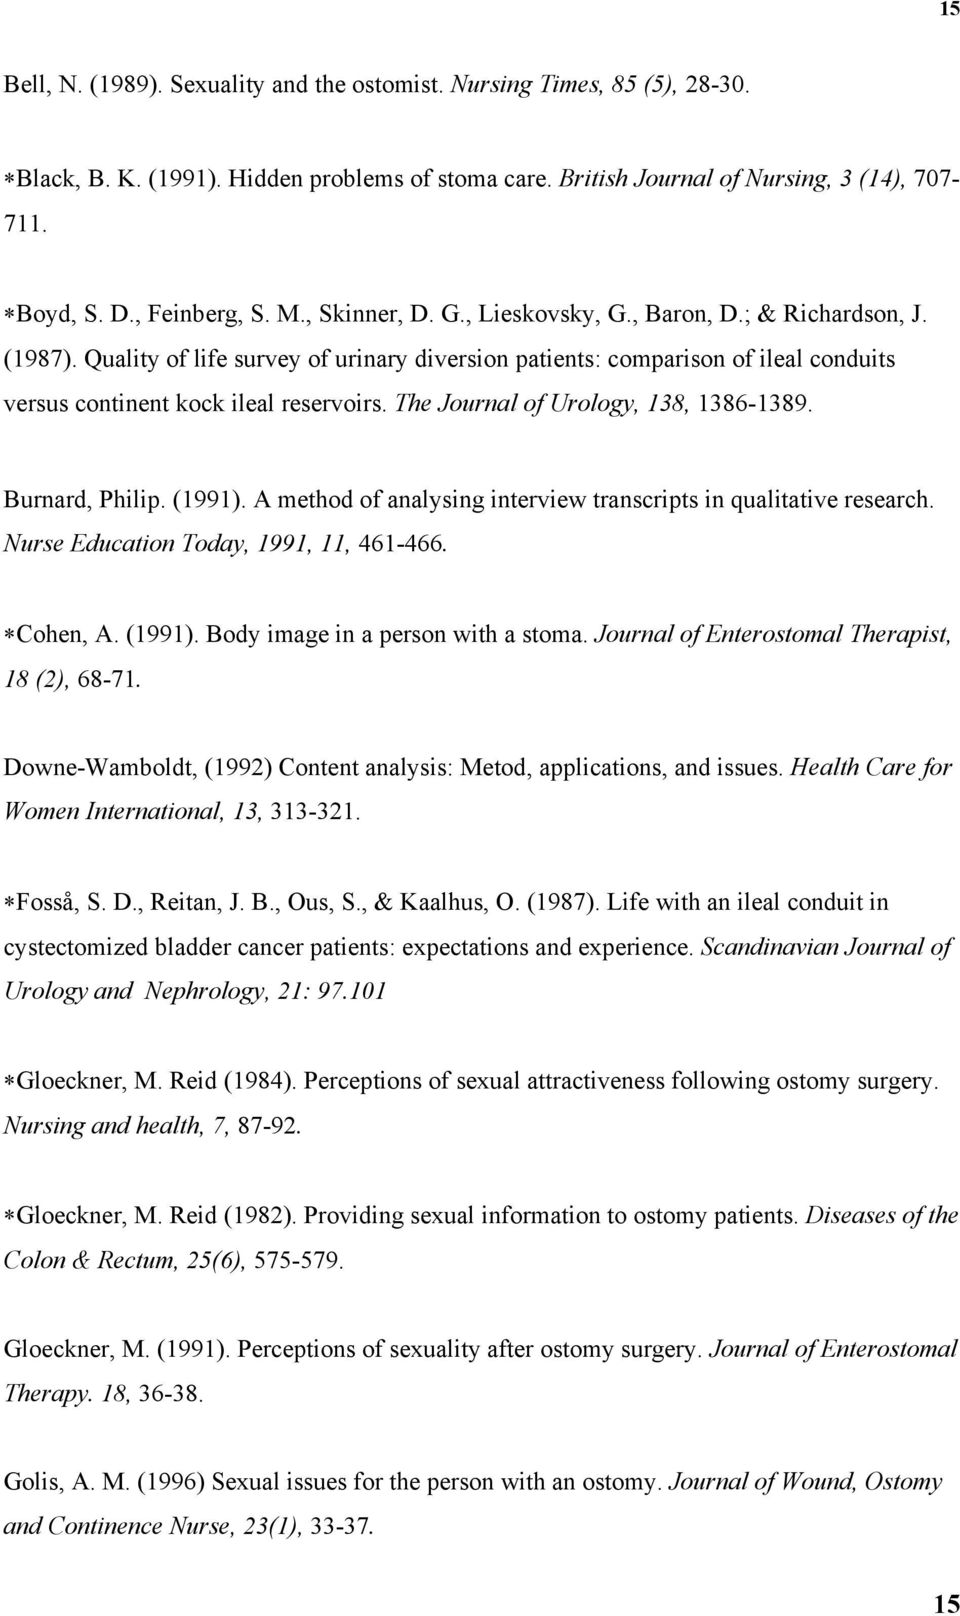 The Journal of Urology, 138, 1386-1389. Burnard, Philip. (1991). A method of analysing interview transcripts in qualitative research. Nurse Education Today, 1991, 11, 461-466. Cohen, A. (1991). Body image in a person with a stoma.